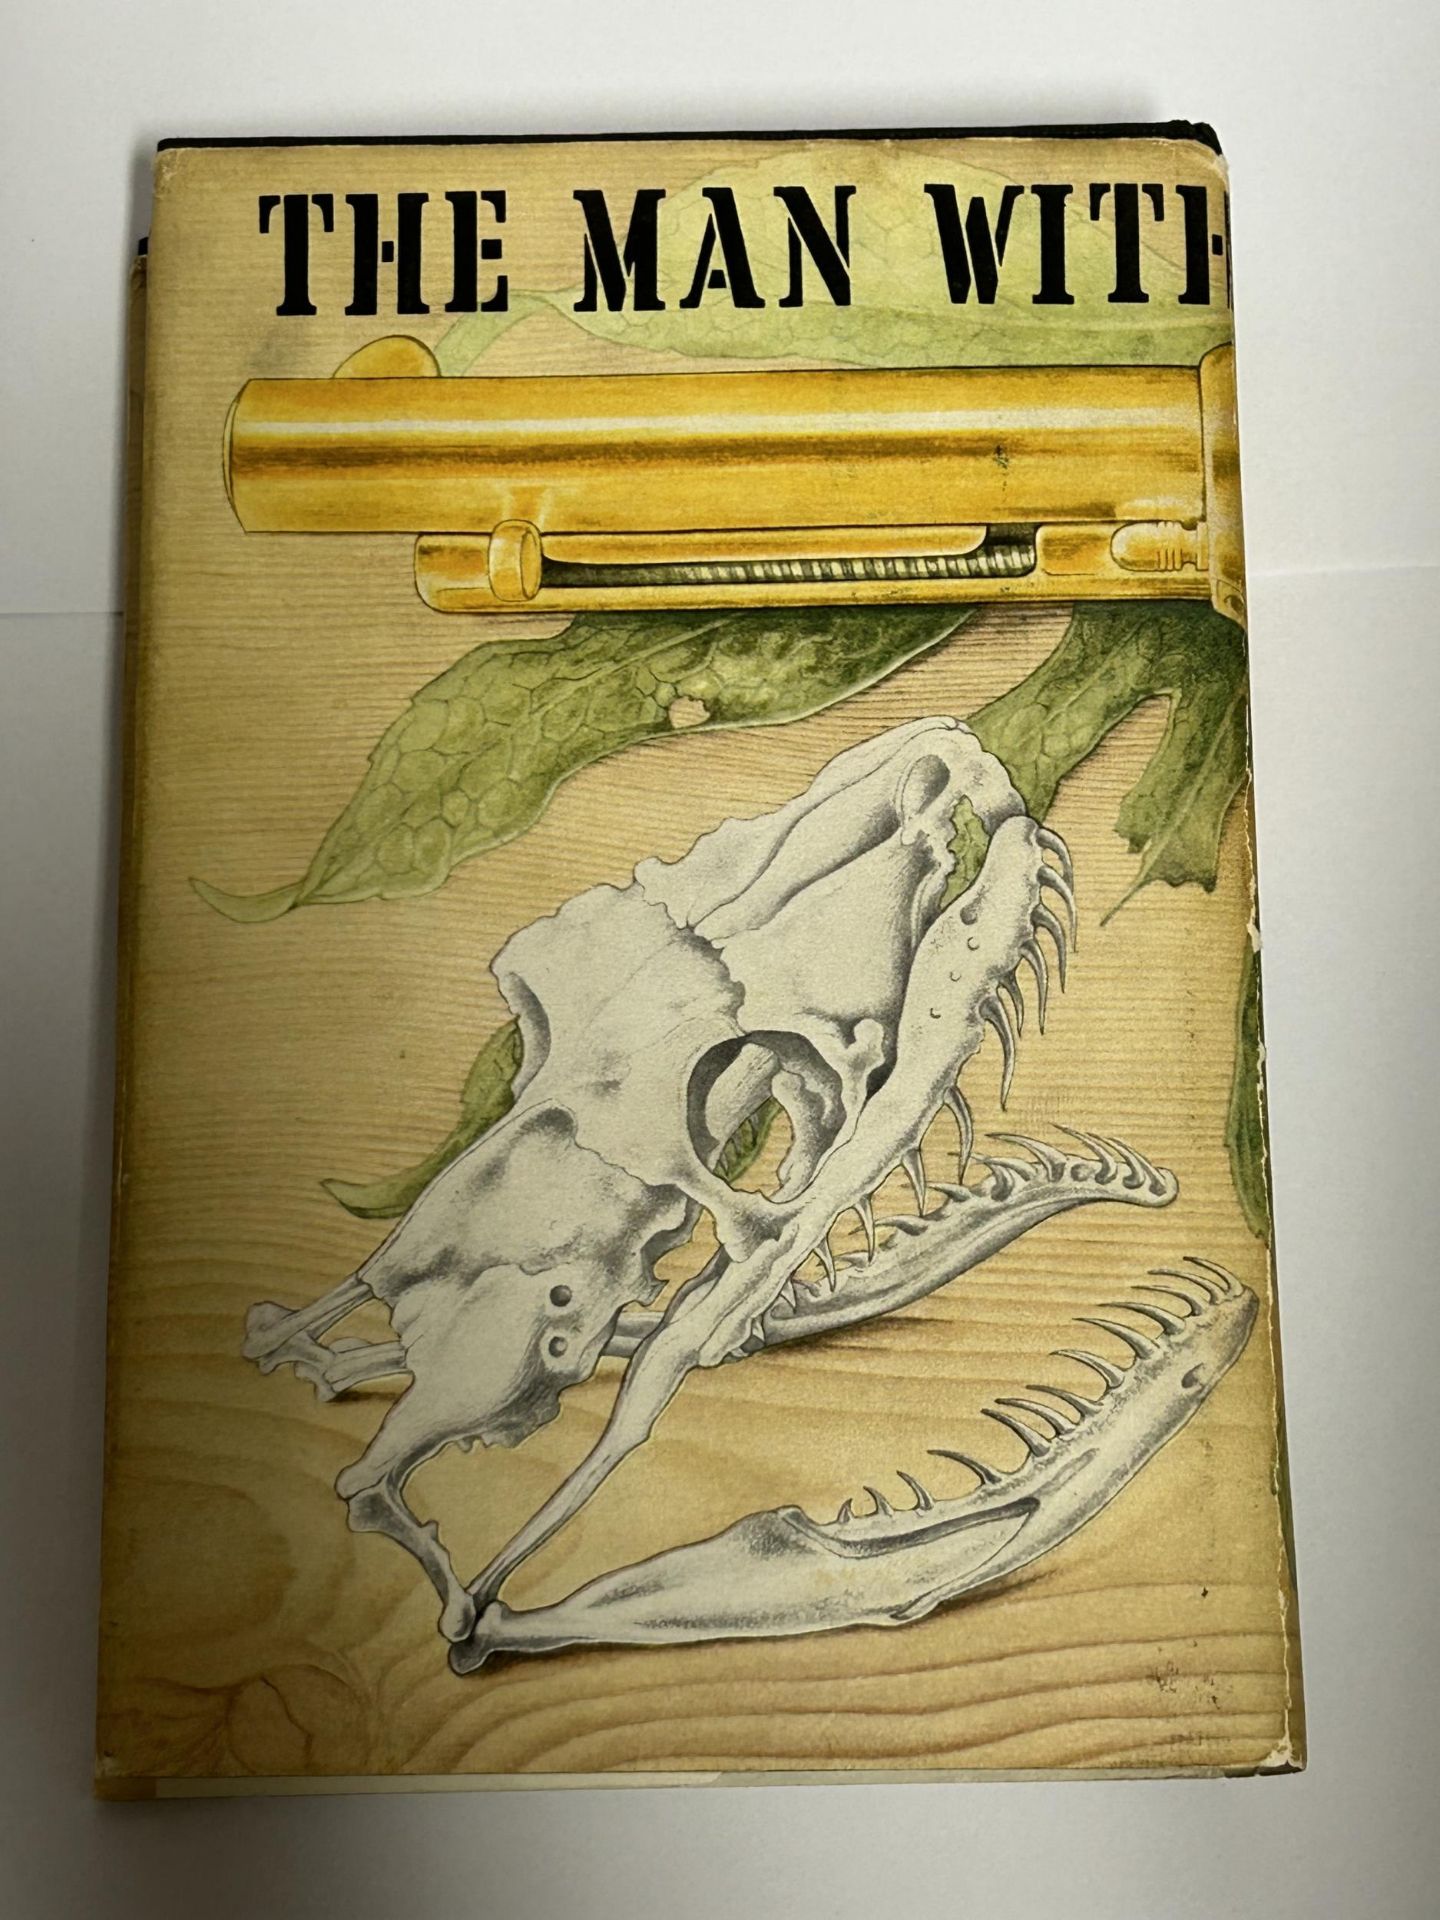 A 1965 IAN FLEMING FIRST EDITION, THE MAN WITH THE GOLDEN GUN, JAMES BOND HARDBACK BOOK COMPLETE - Image 7 of 7